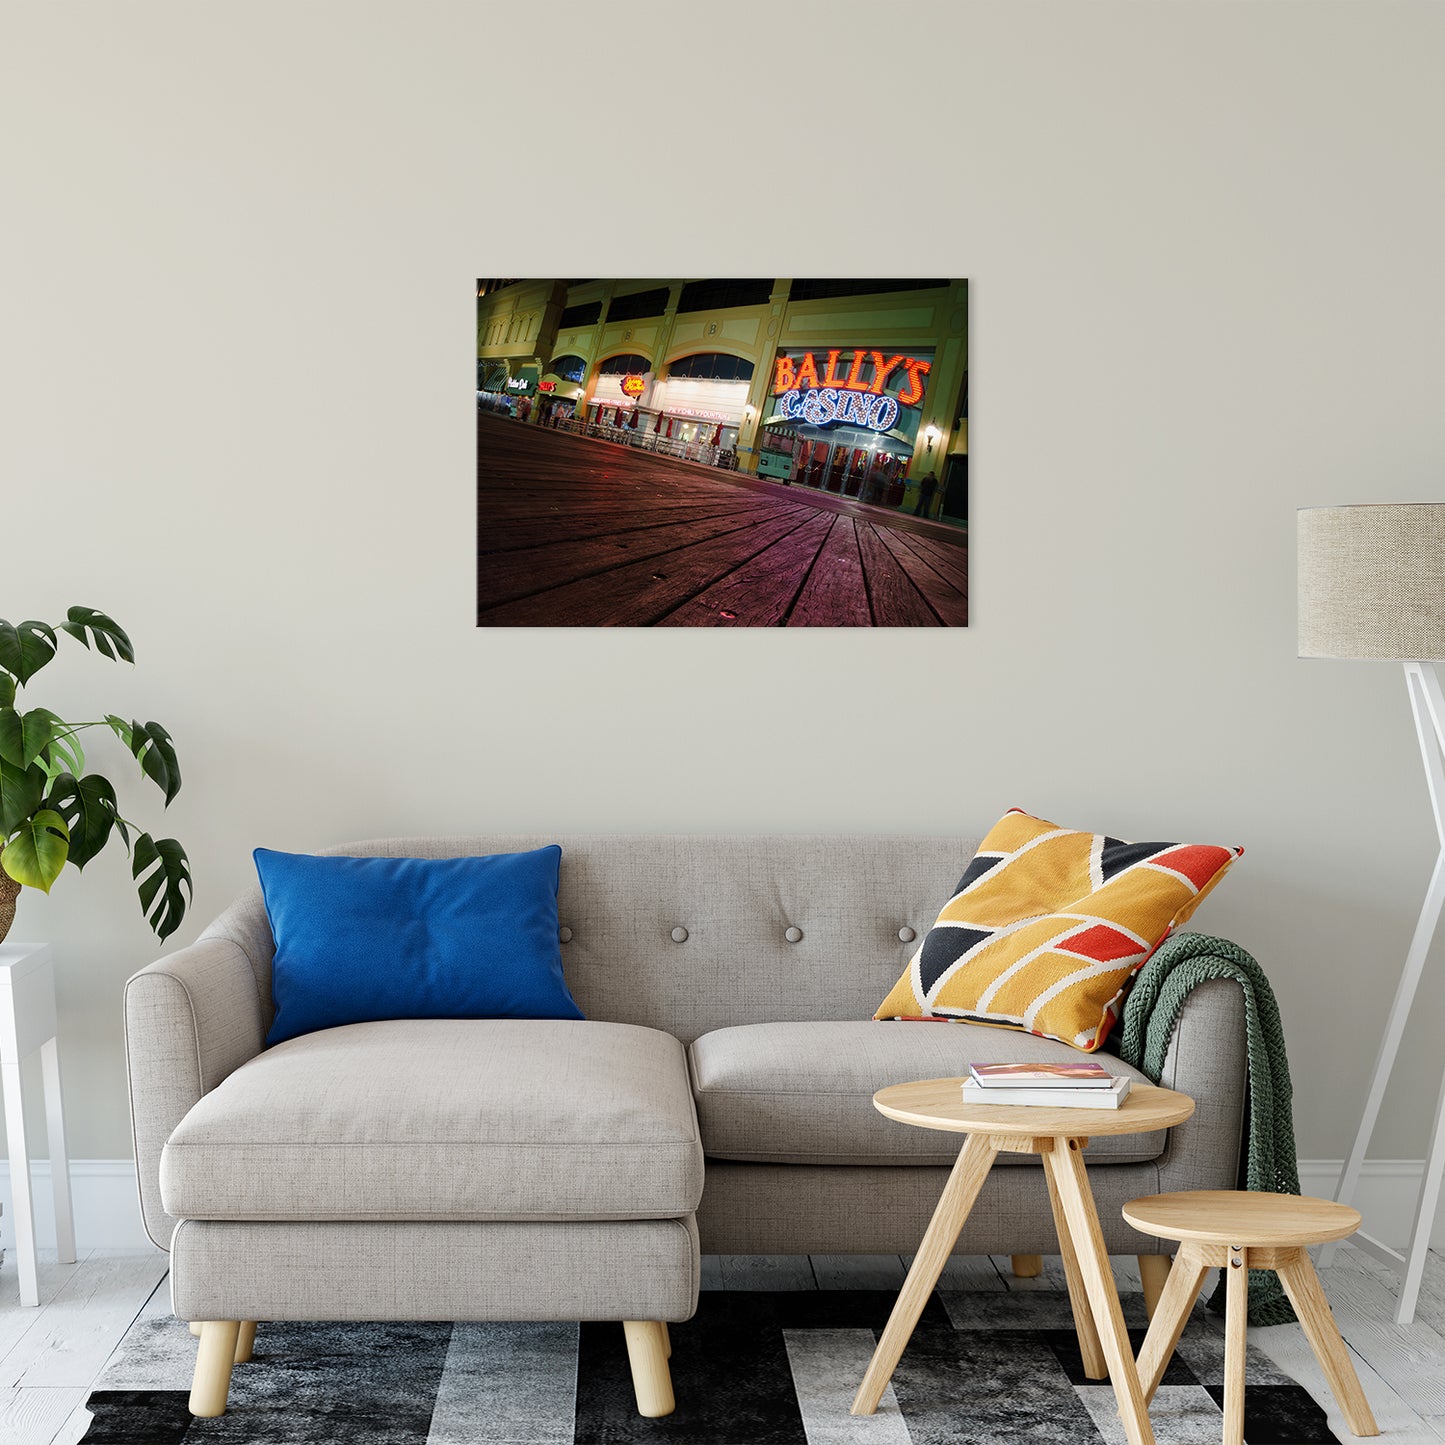 Low on the Boards Night Photo Fine Art Canvas Wall Art Prints 24" x 36" - PIPAFINEART